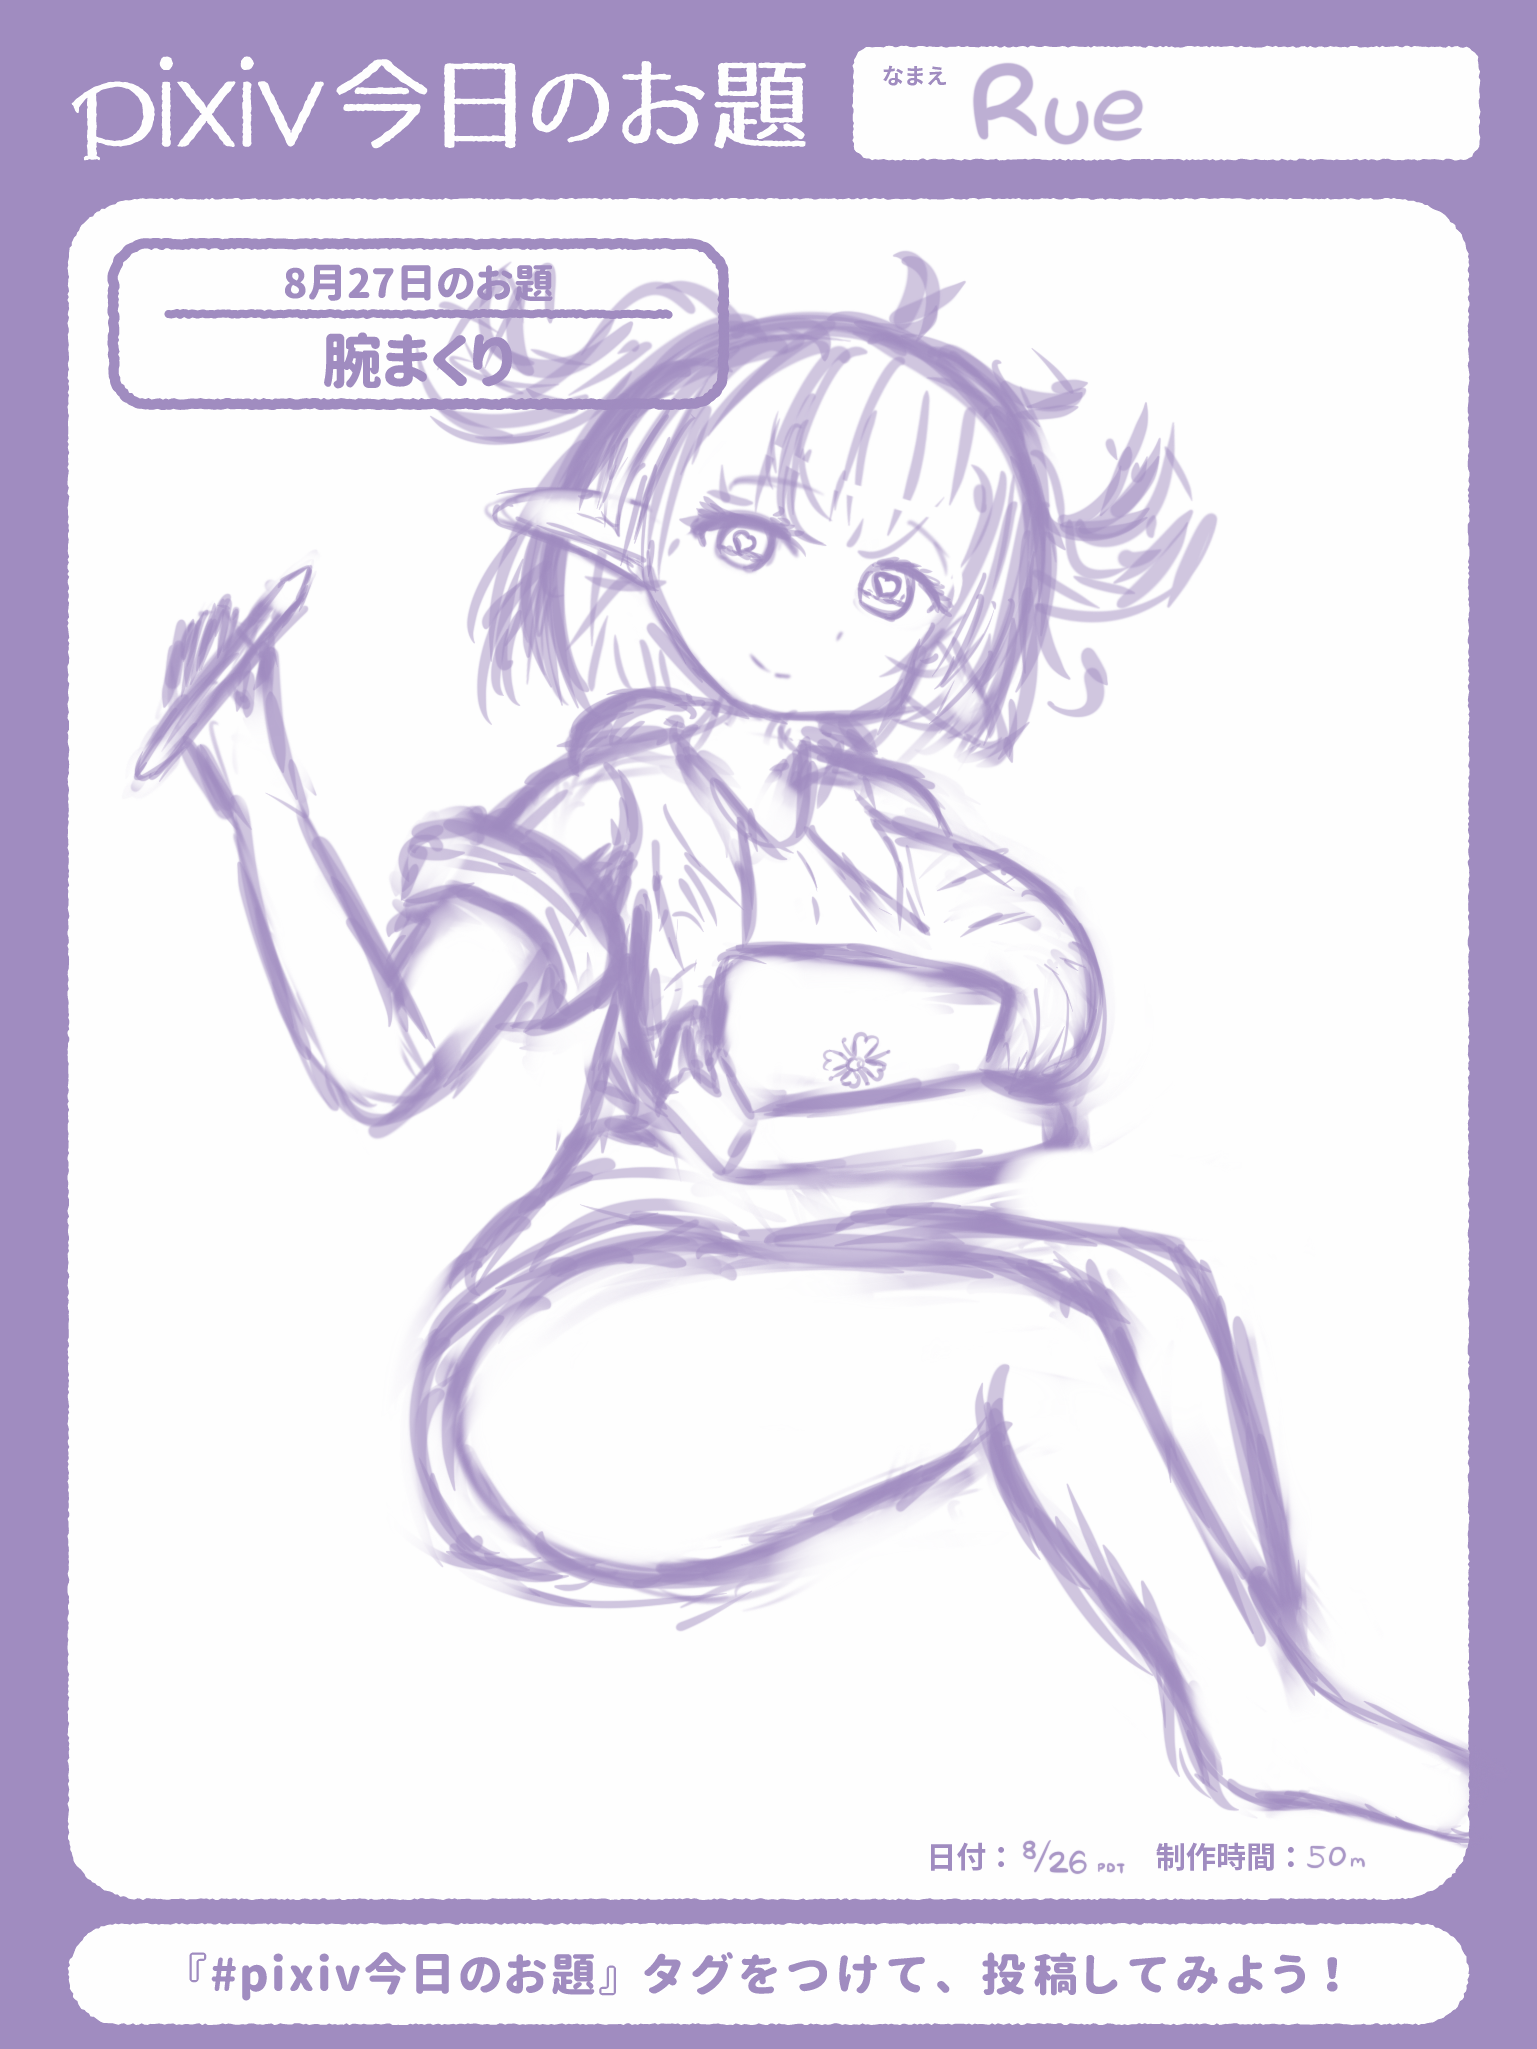 My sketch for today’s  #腕まくり theme from pixiv今日のお題-sensei. It’s me sketching with my sleeves rolled up! It’s a pretty rough, more “sketchy” sketch, so it leaves a bit more to imagination and interpretation with course lines and messy areas.